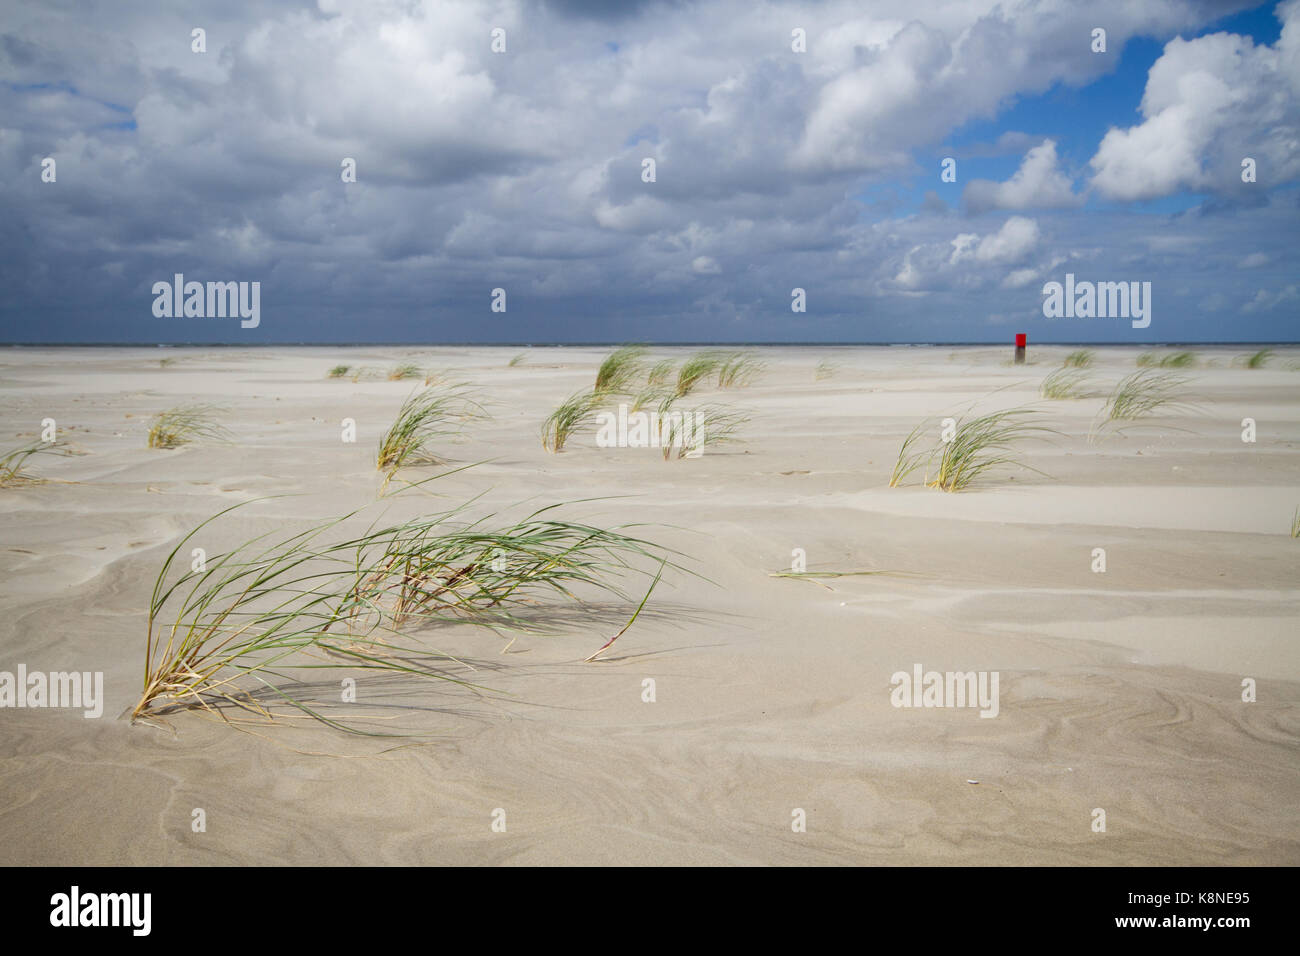 Storm on a vast beach, Sand Couch grass bent in the wind, in the distance a red beach pole Stock Photo